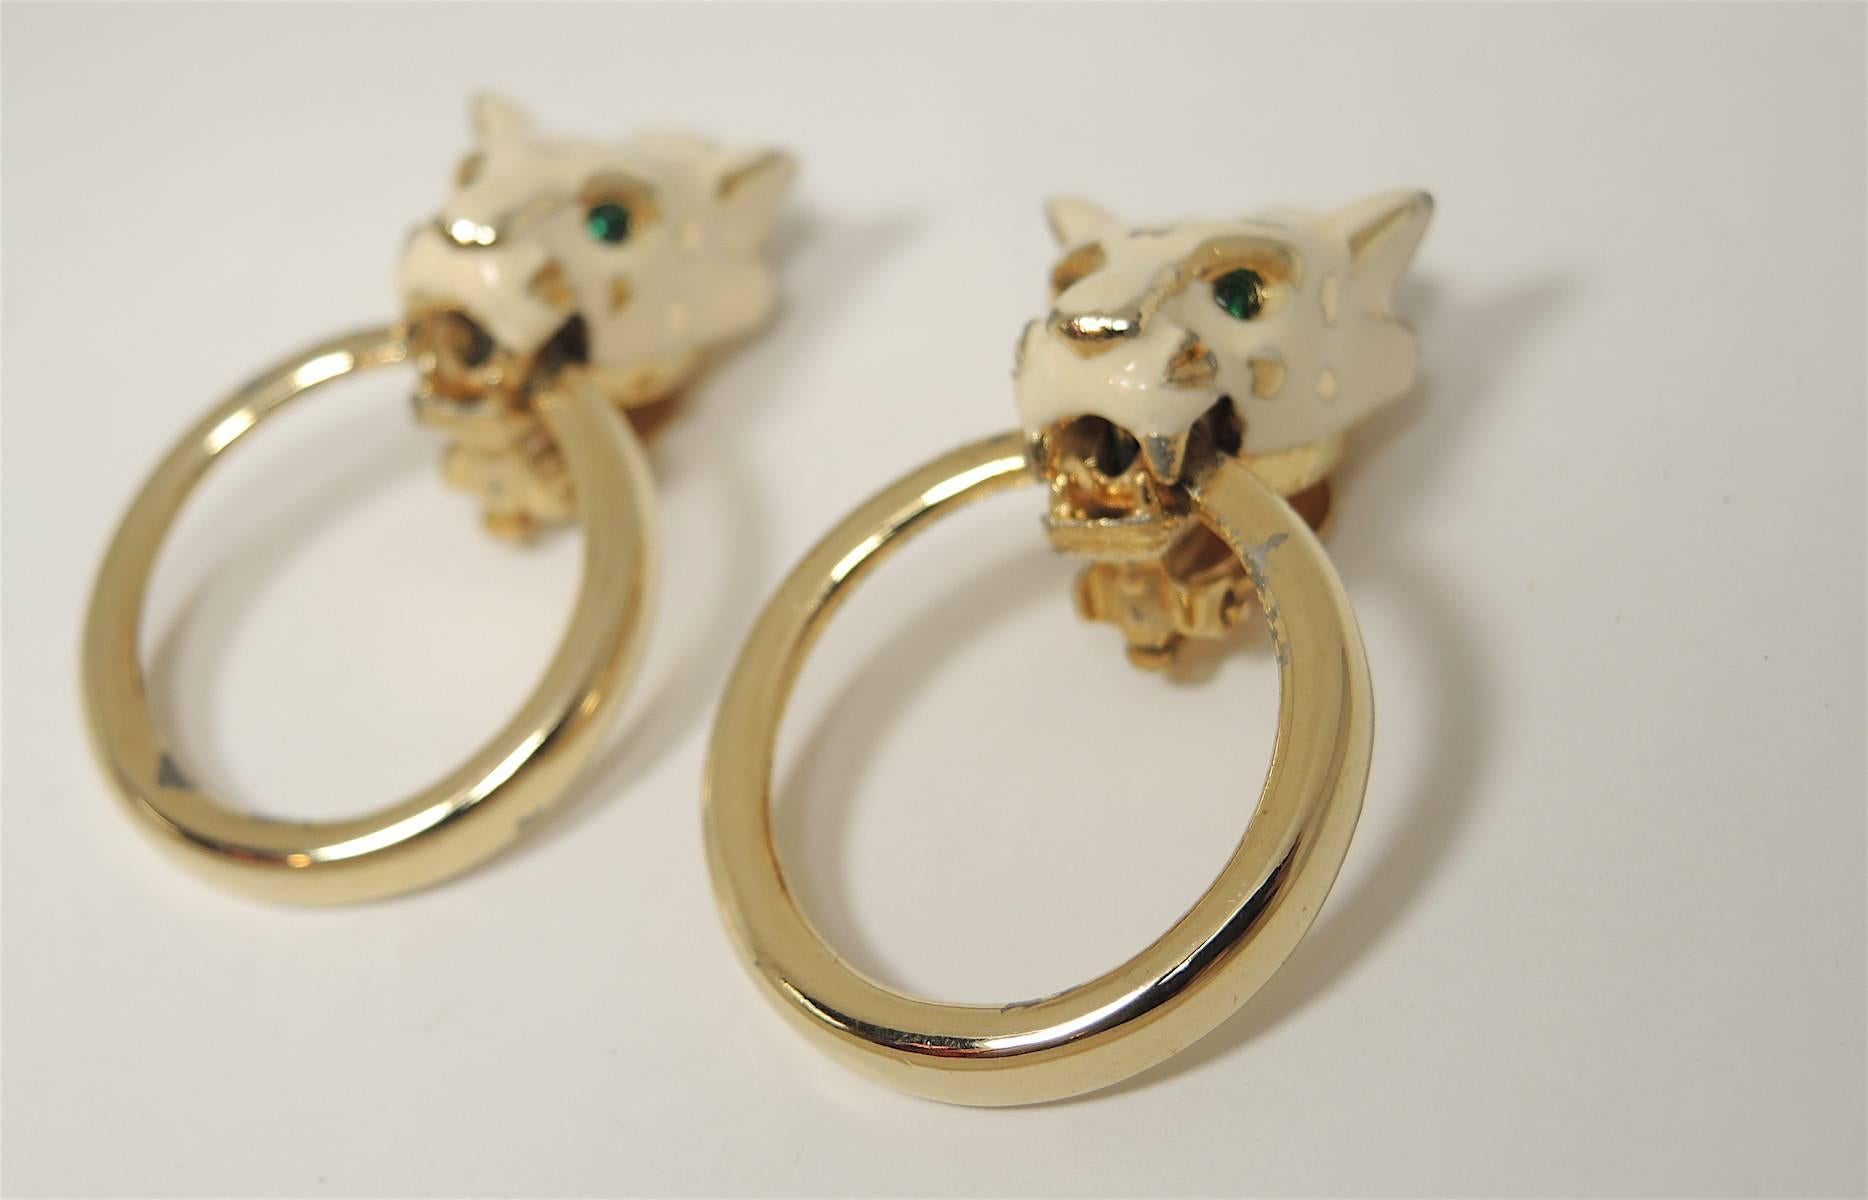 These vintage leopard earrings have green crystal eyes with crystal accents in a gold-tone setting.  The leopard is holding hoops. These clip earrings measure 1-1/2” x 1” and are in excellent condition.